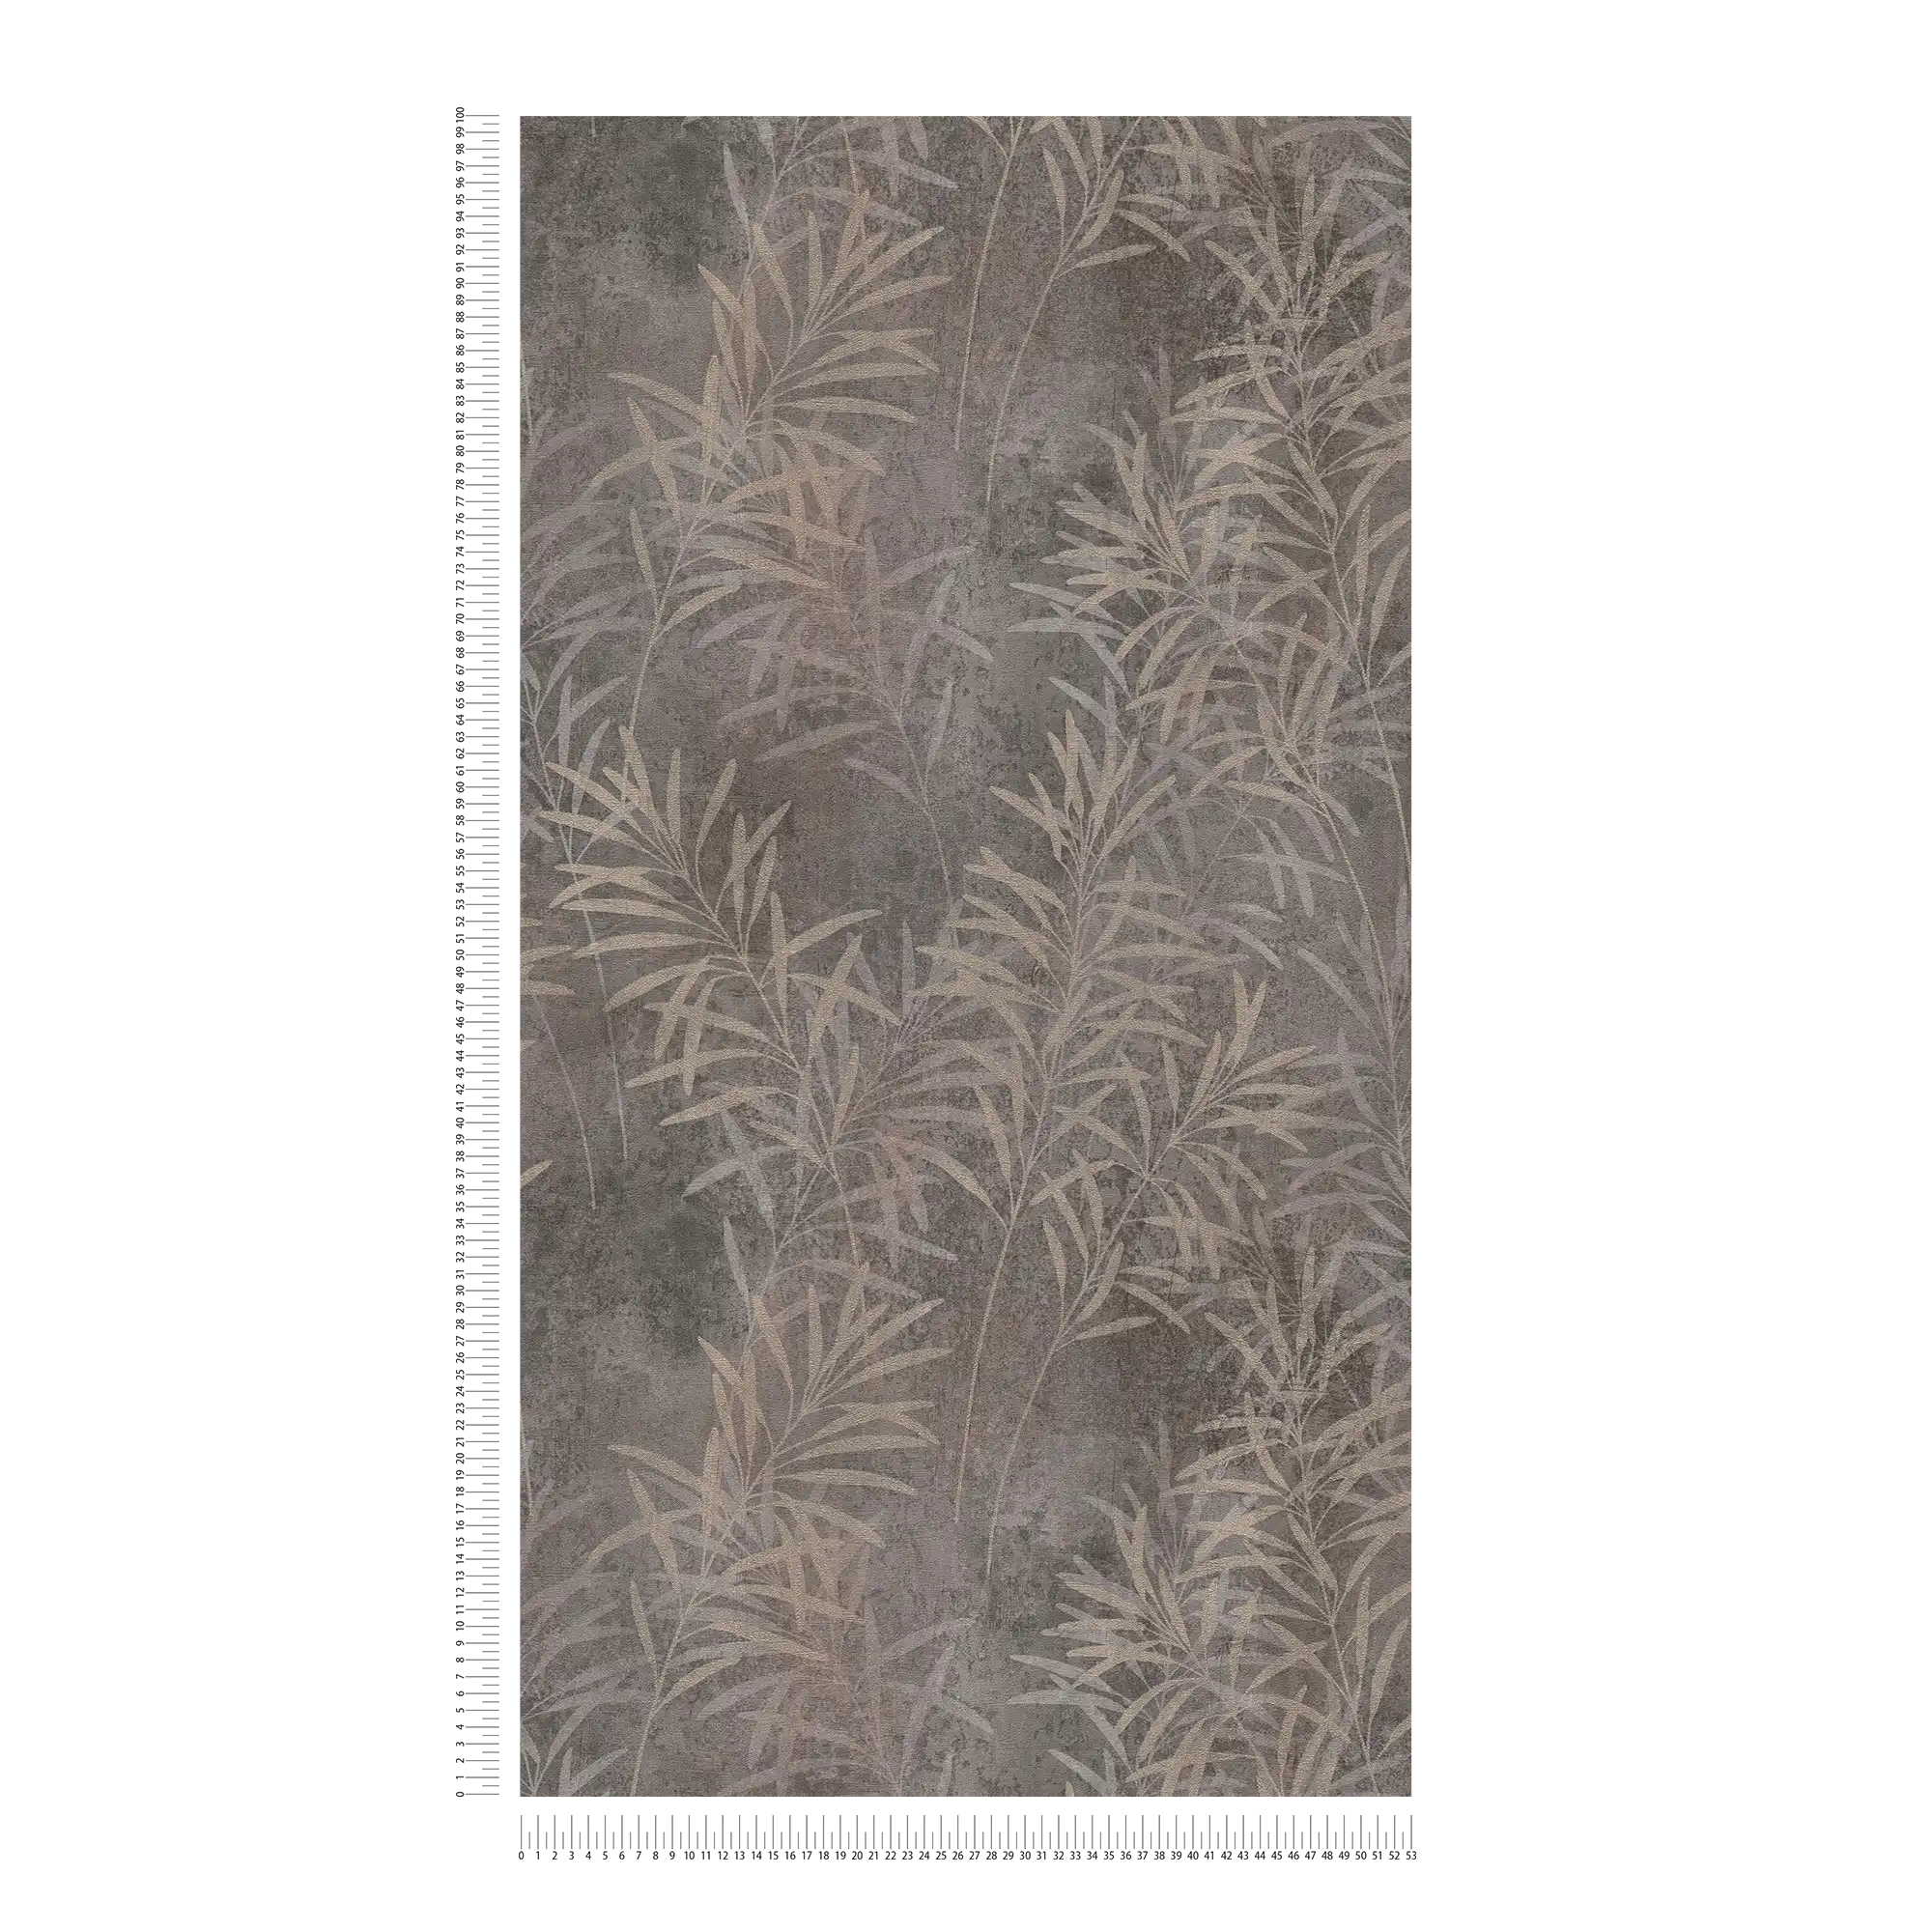             Floral non-woven wallpaper with grass pattern and fine structure - grey, beige, metallic
        